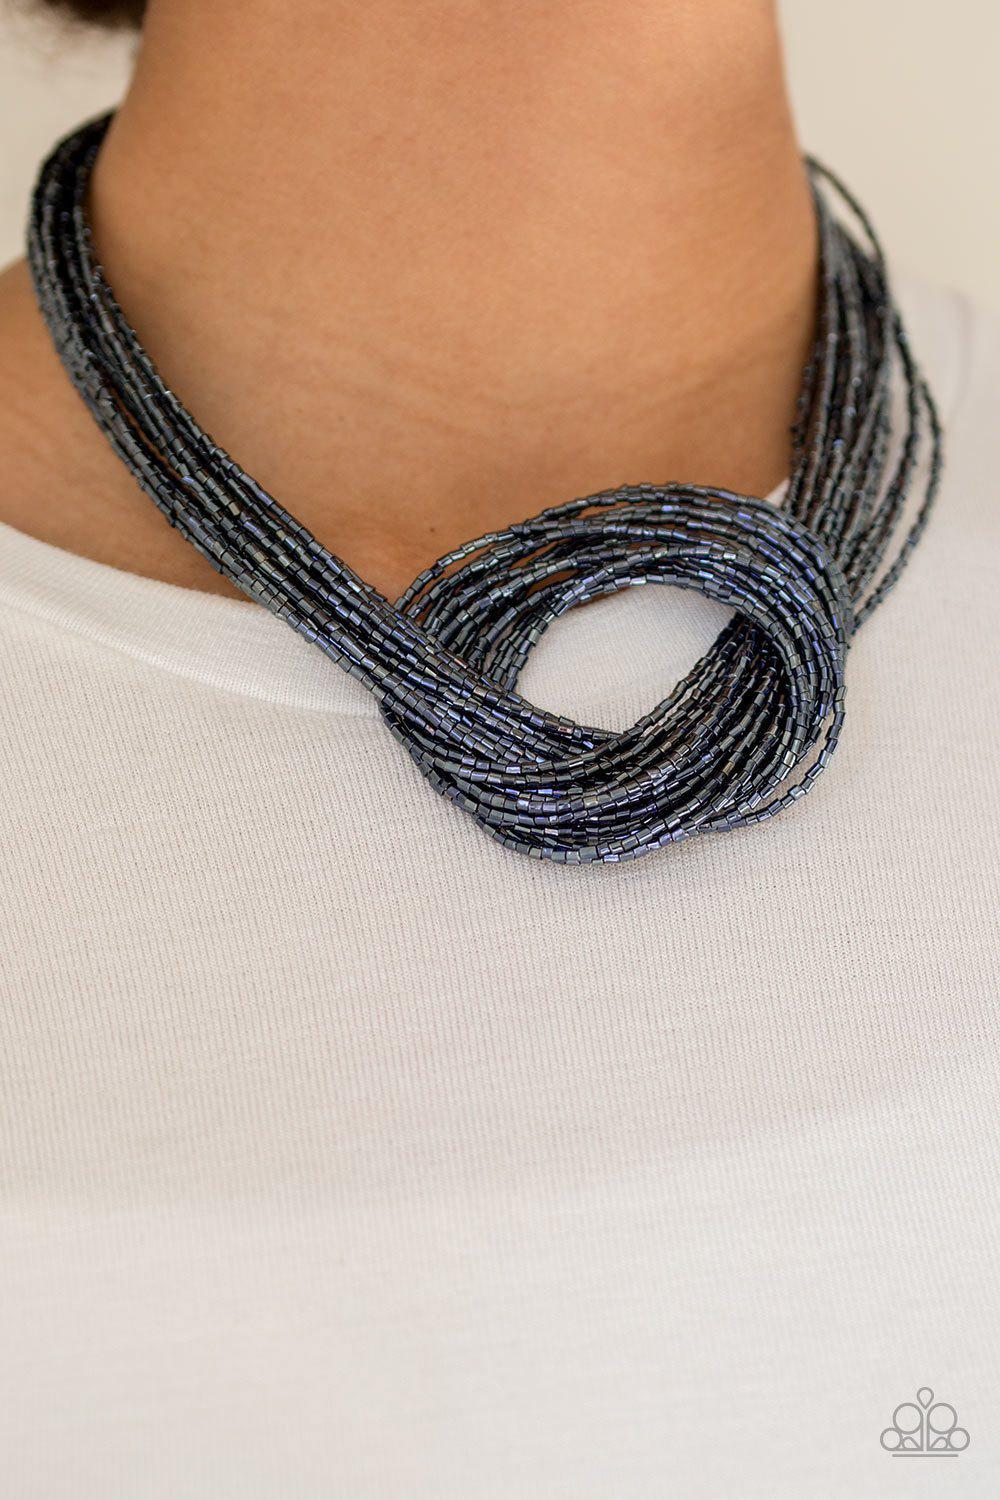 Knotted Knockout Metallic Blue Seed Bead Necklace and matching Earrings - Paparazzi Accessories-CarasShop.com - $5 Jewelry by Cara Jewels